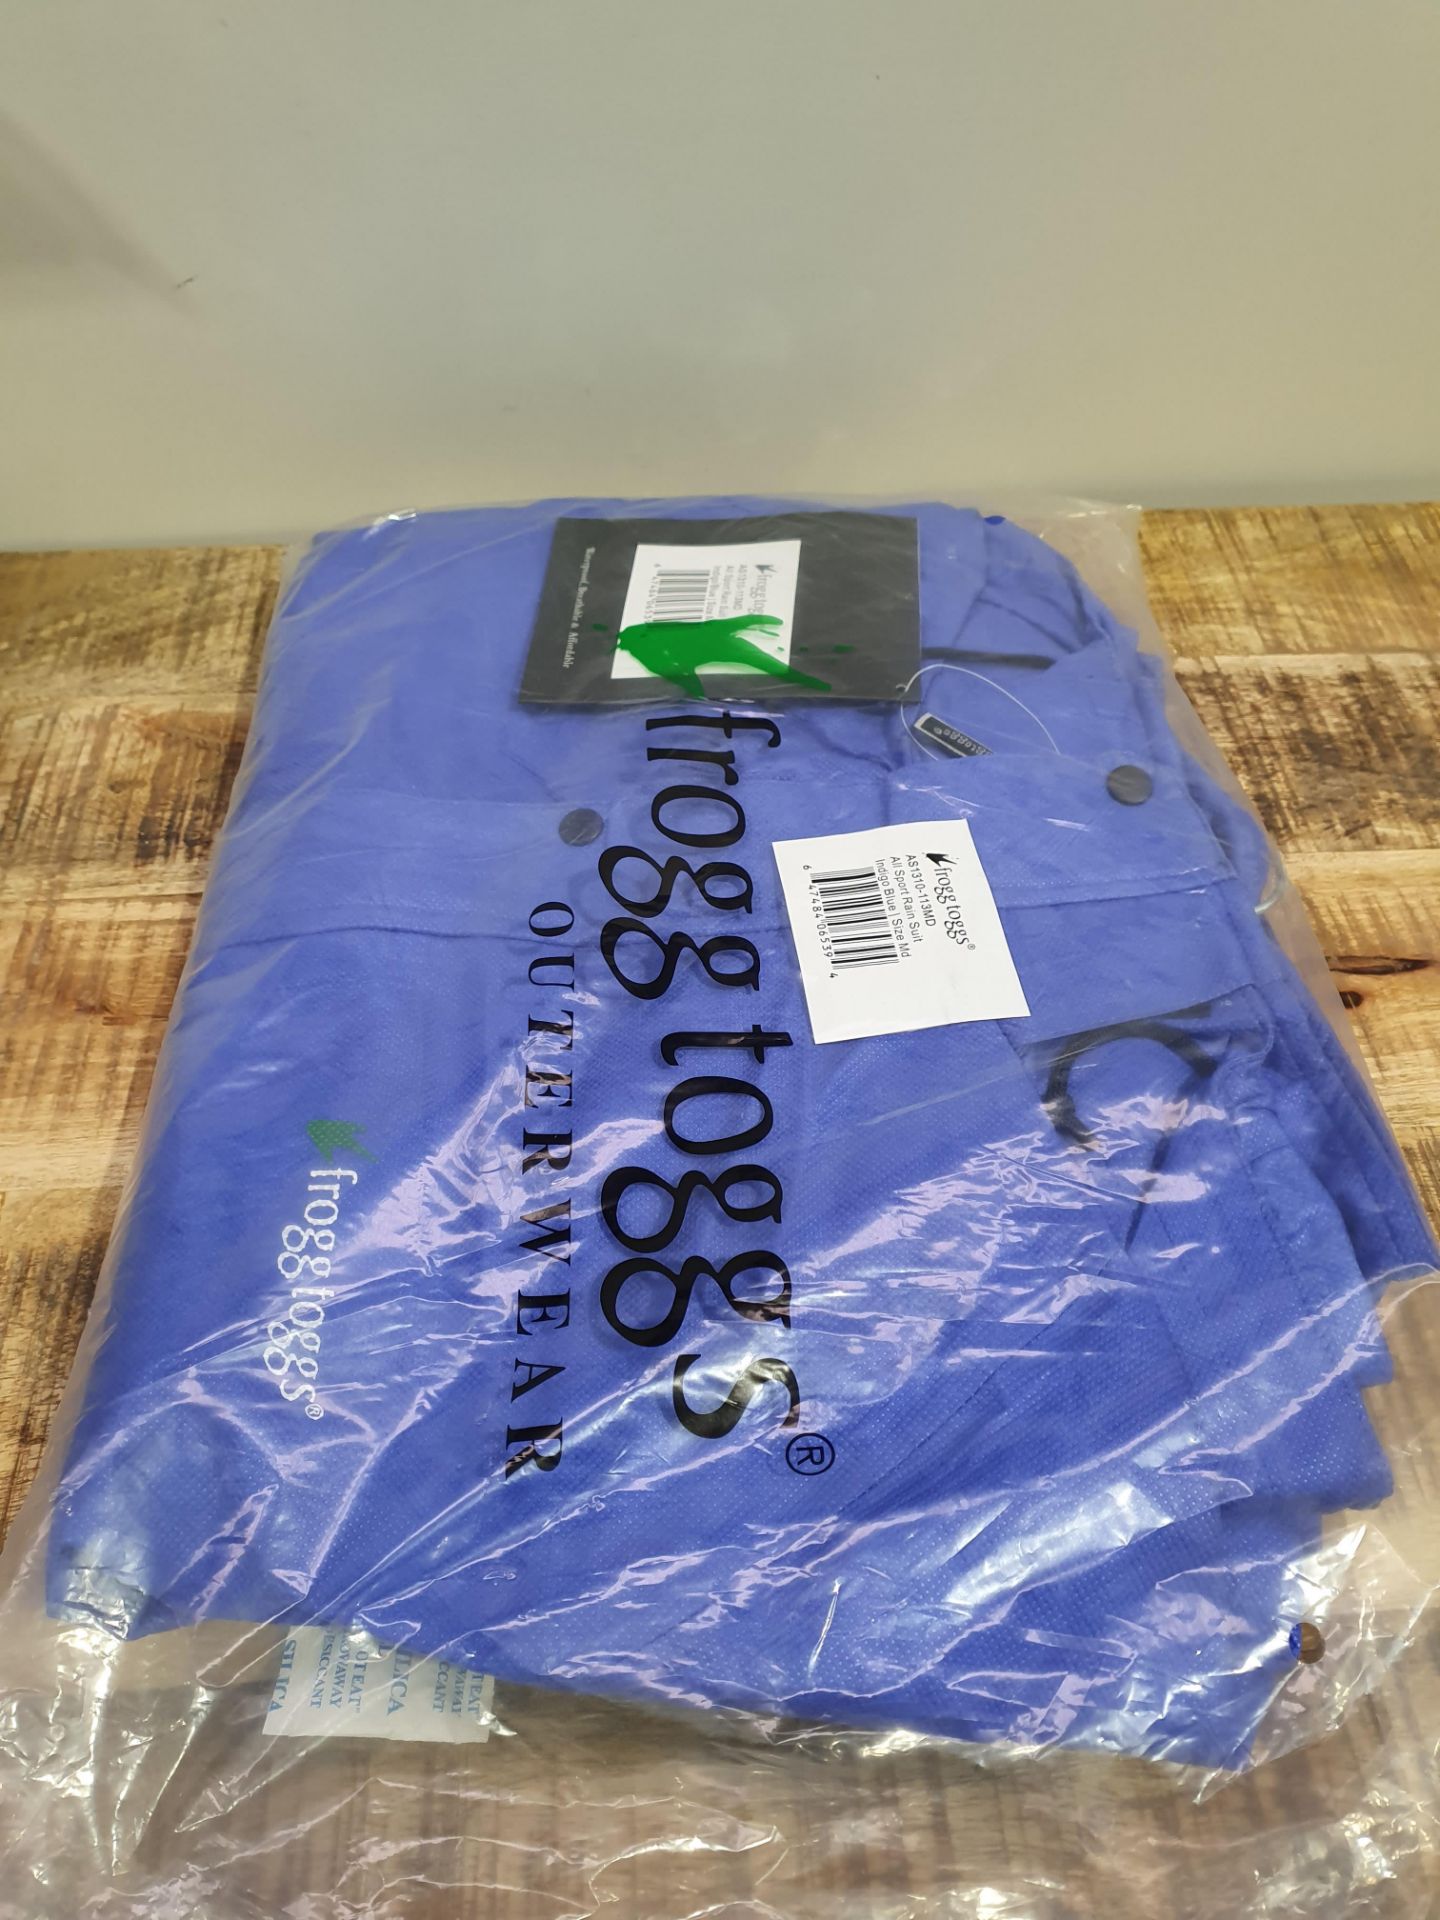 FROGG TOGGS OUTERWEAR ALL SPORT RAIN SUIT INDIGIO BLUE SIZE MEDIUM RRP £44Condition